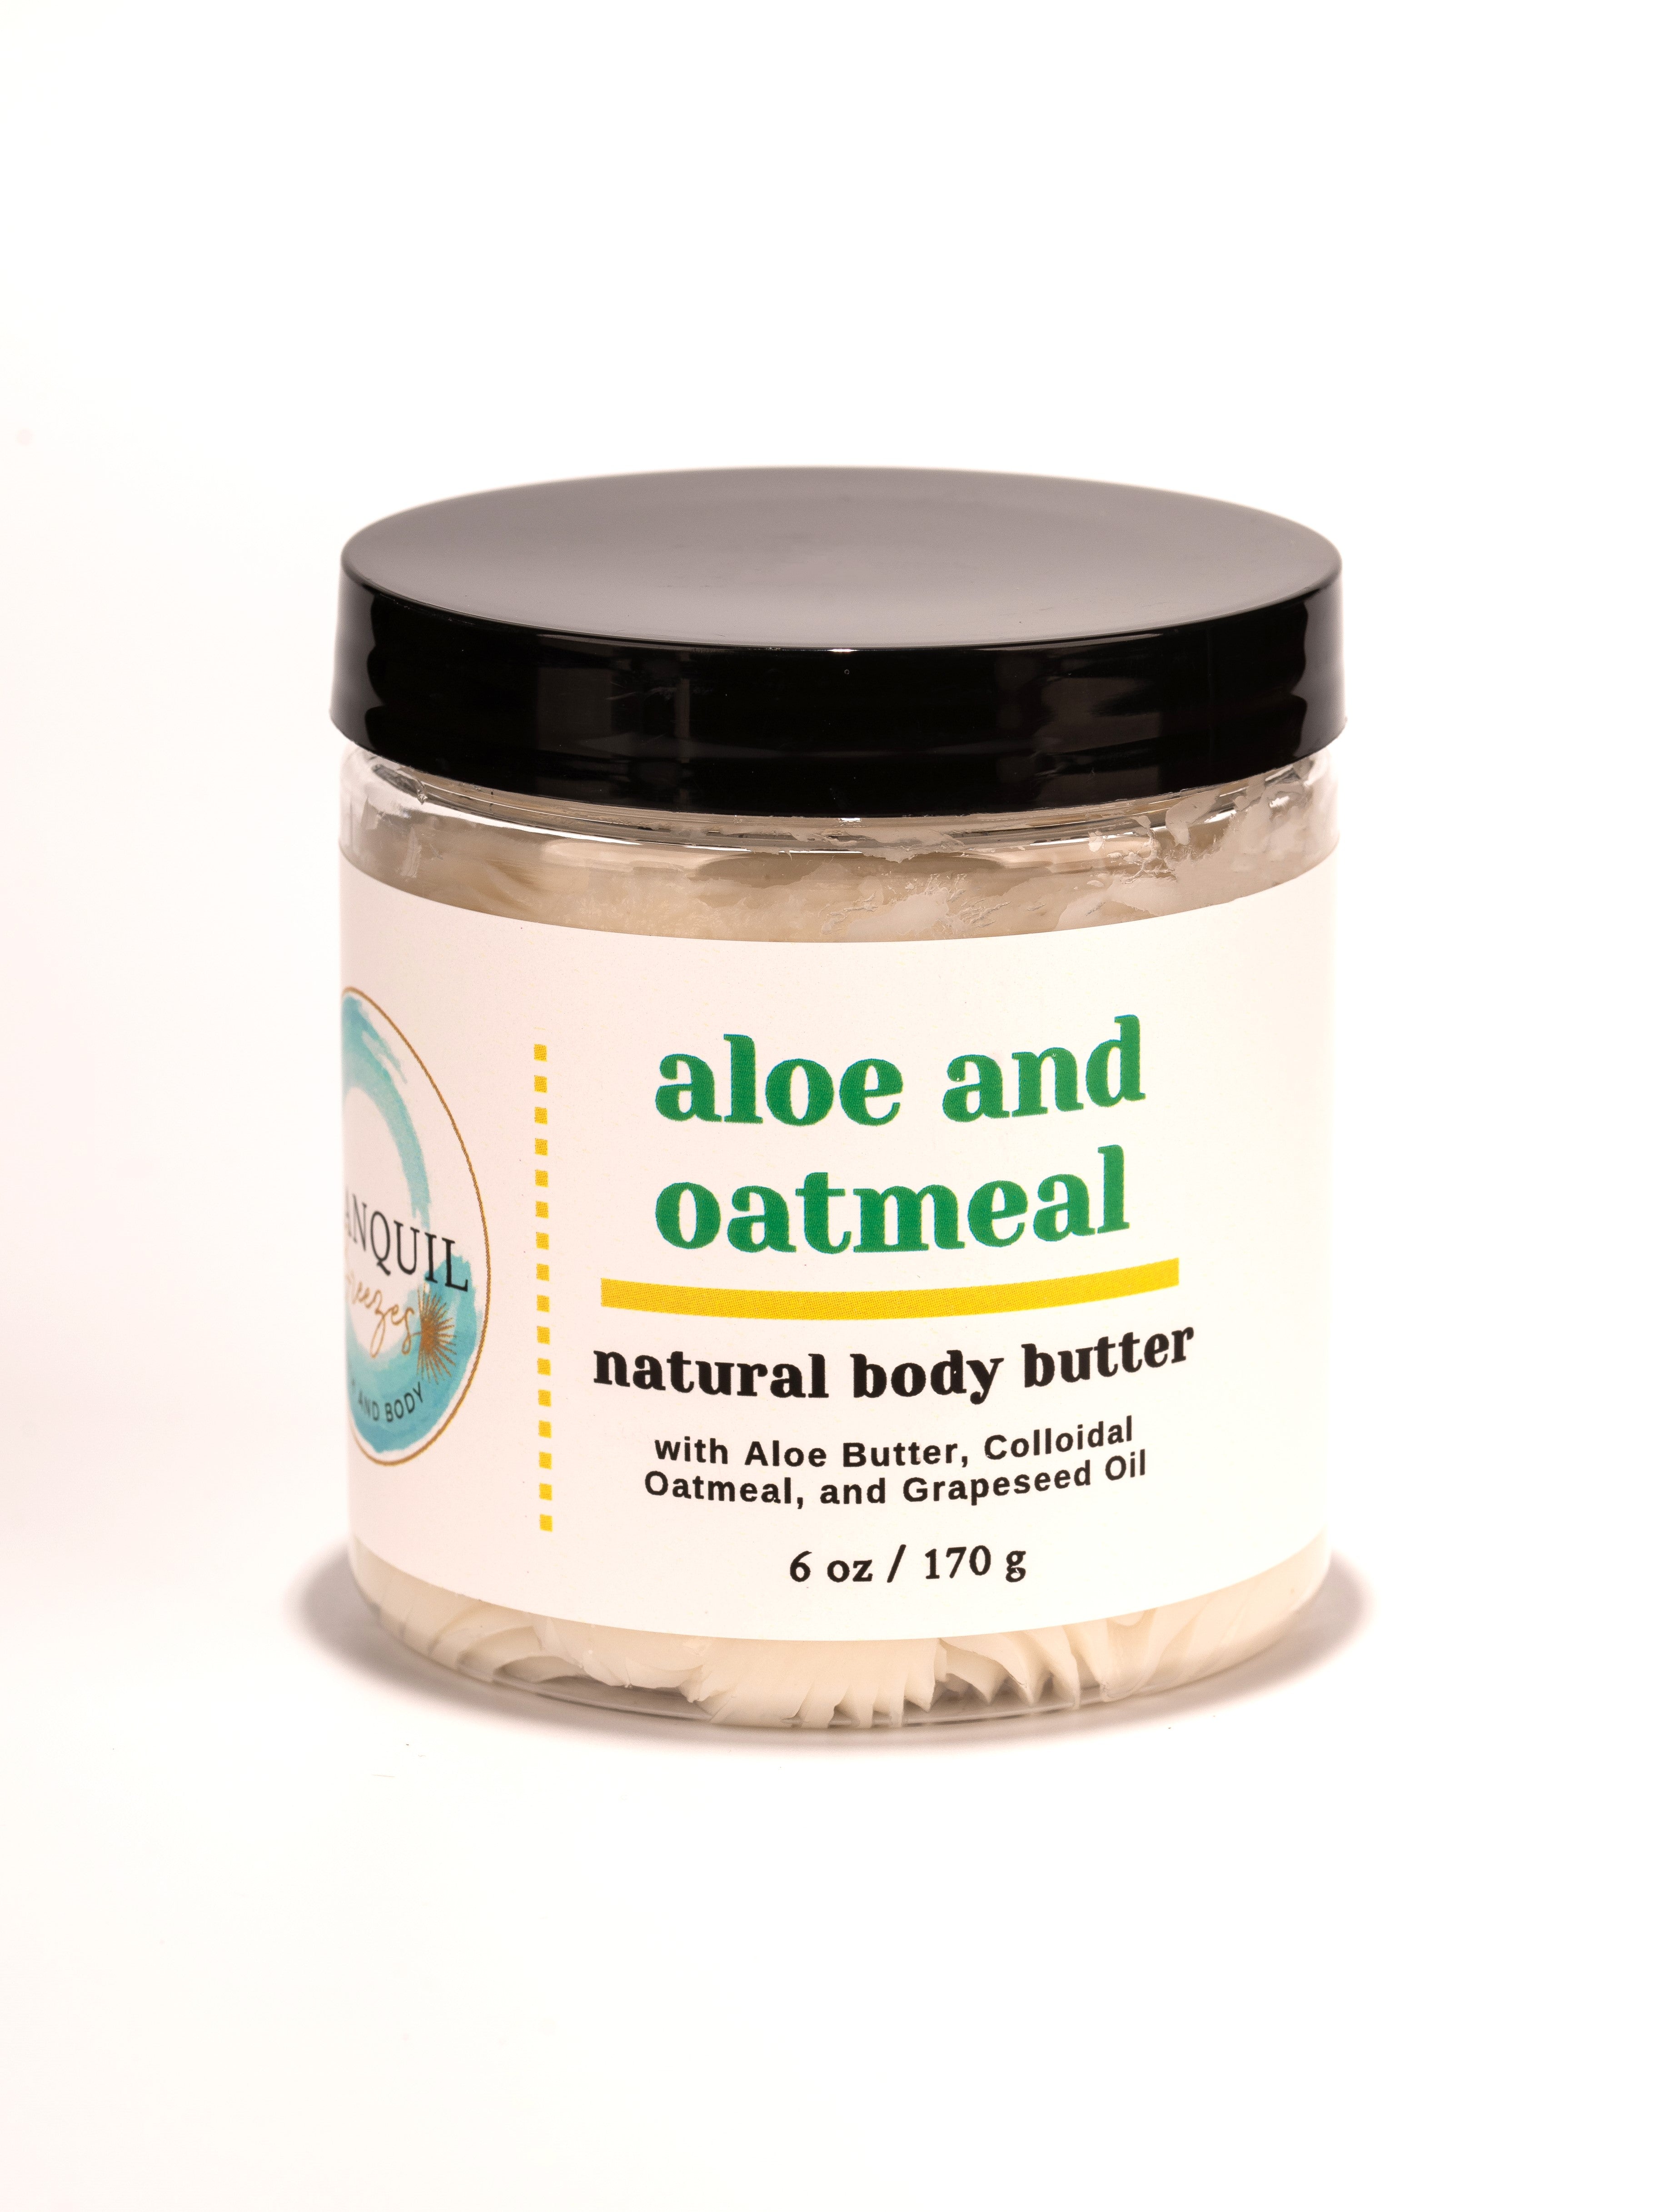 Aloe and Oatmeal Natural Body Butter